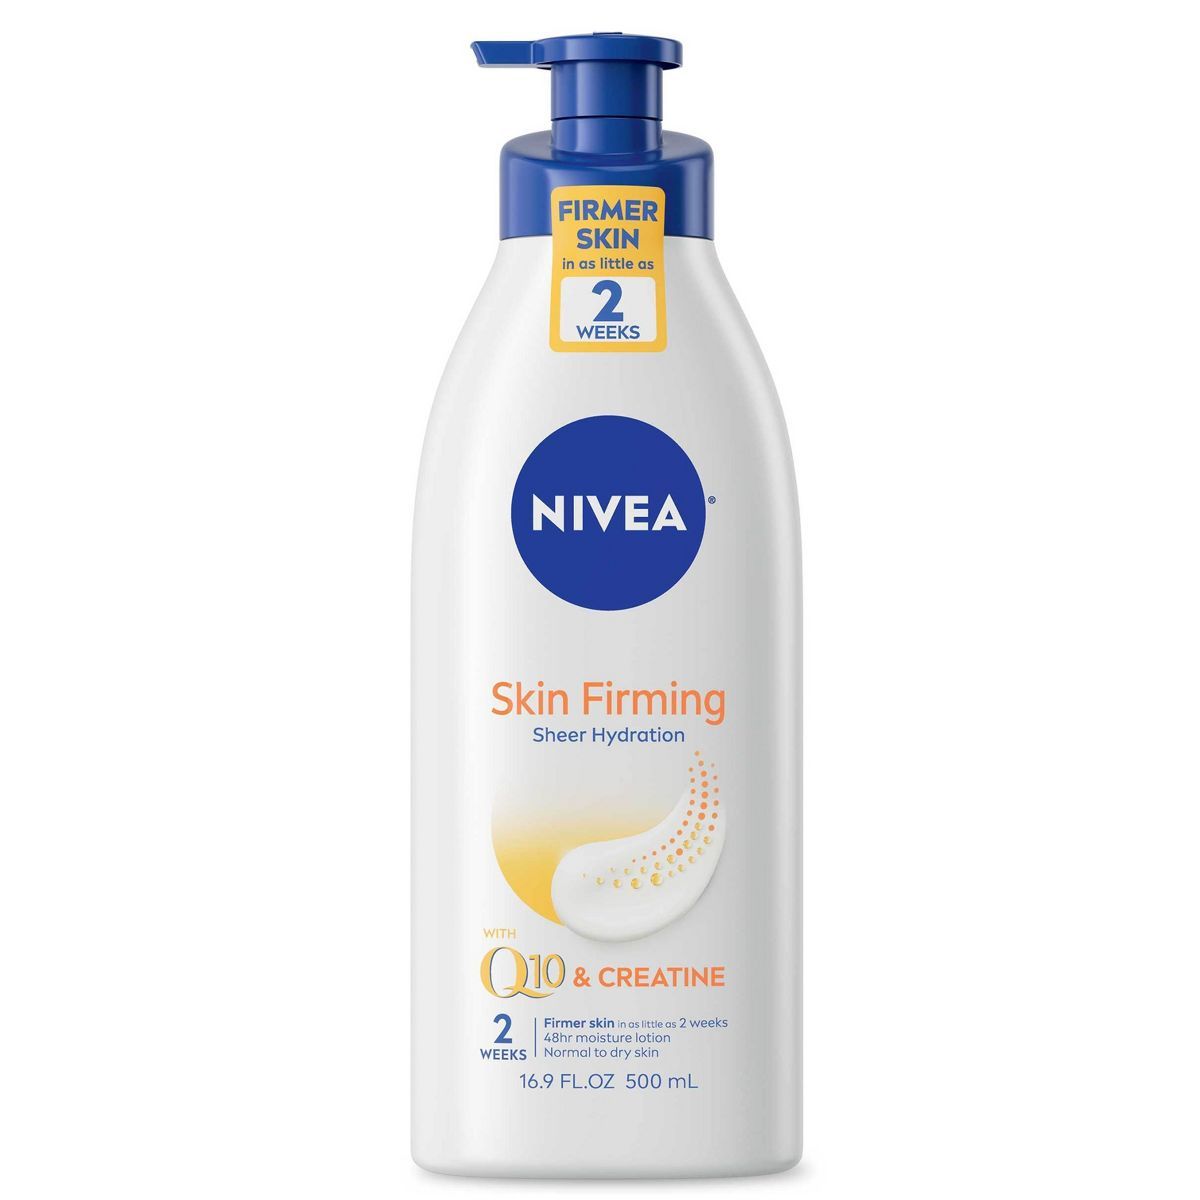 Nivea Skin Firming Hydration Body Lotion with Q10 and Shea Butter Scented - 16.9 fl oz | Target